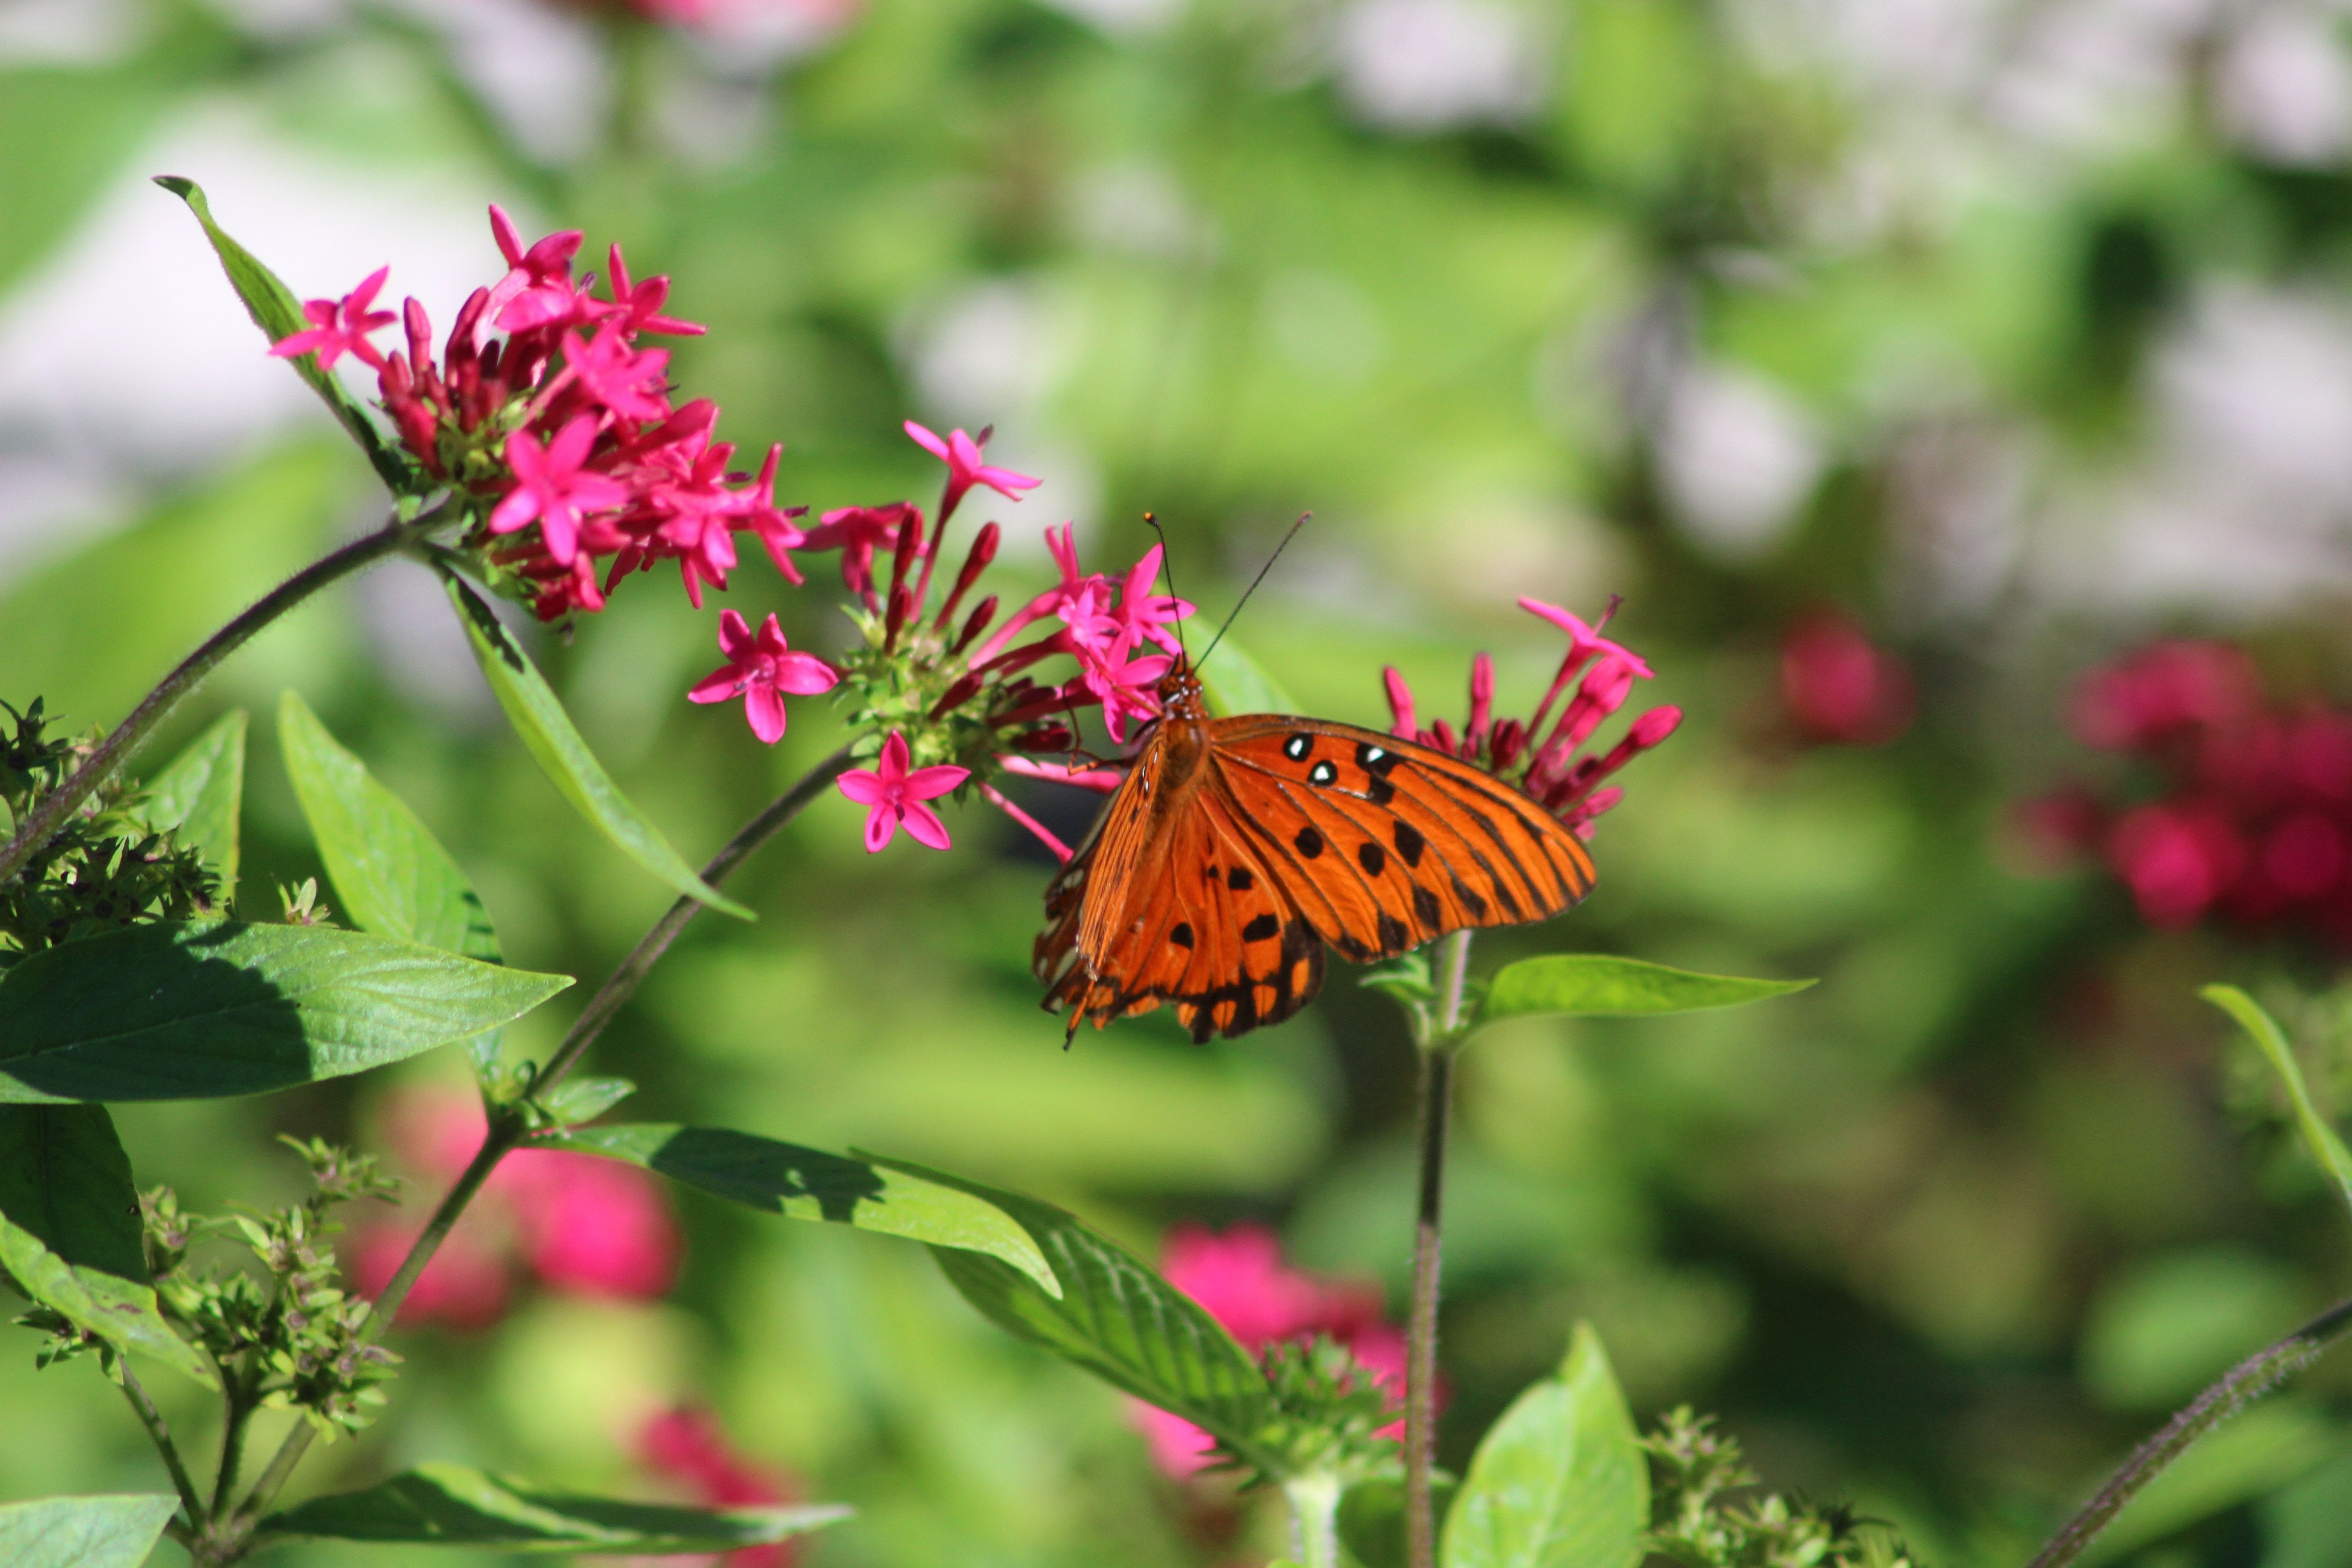 gulf fritillary butterfly perched on pink petaled flower